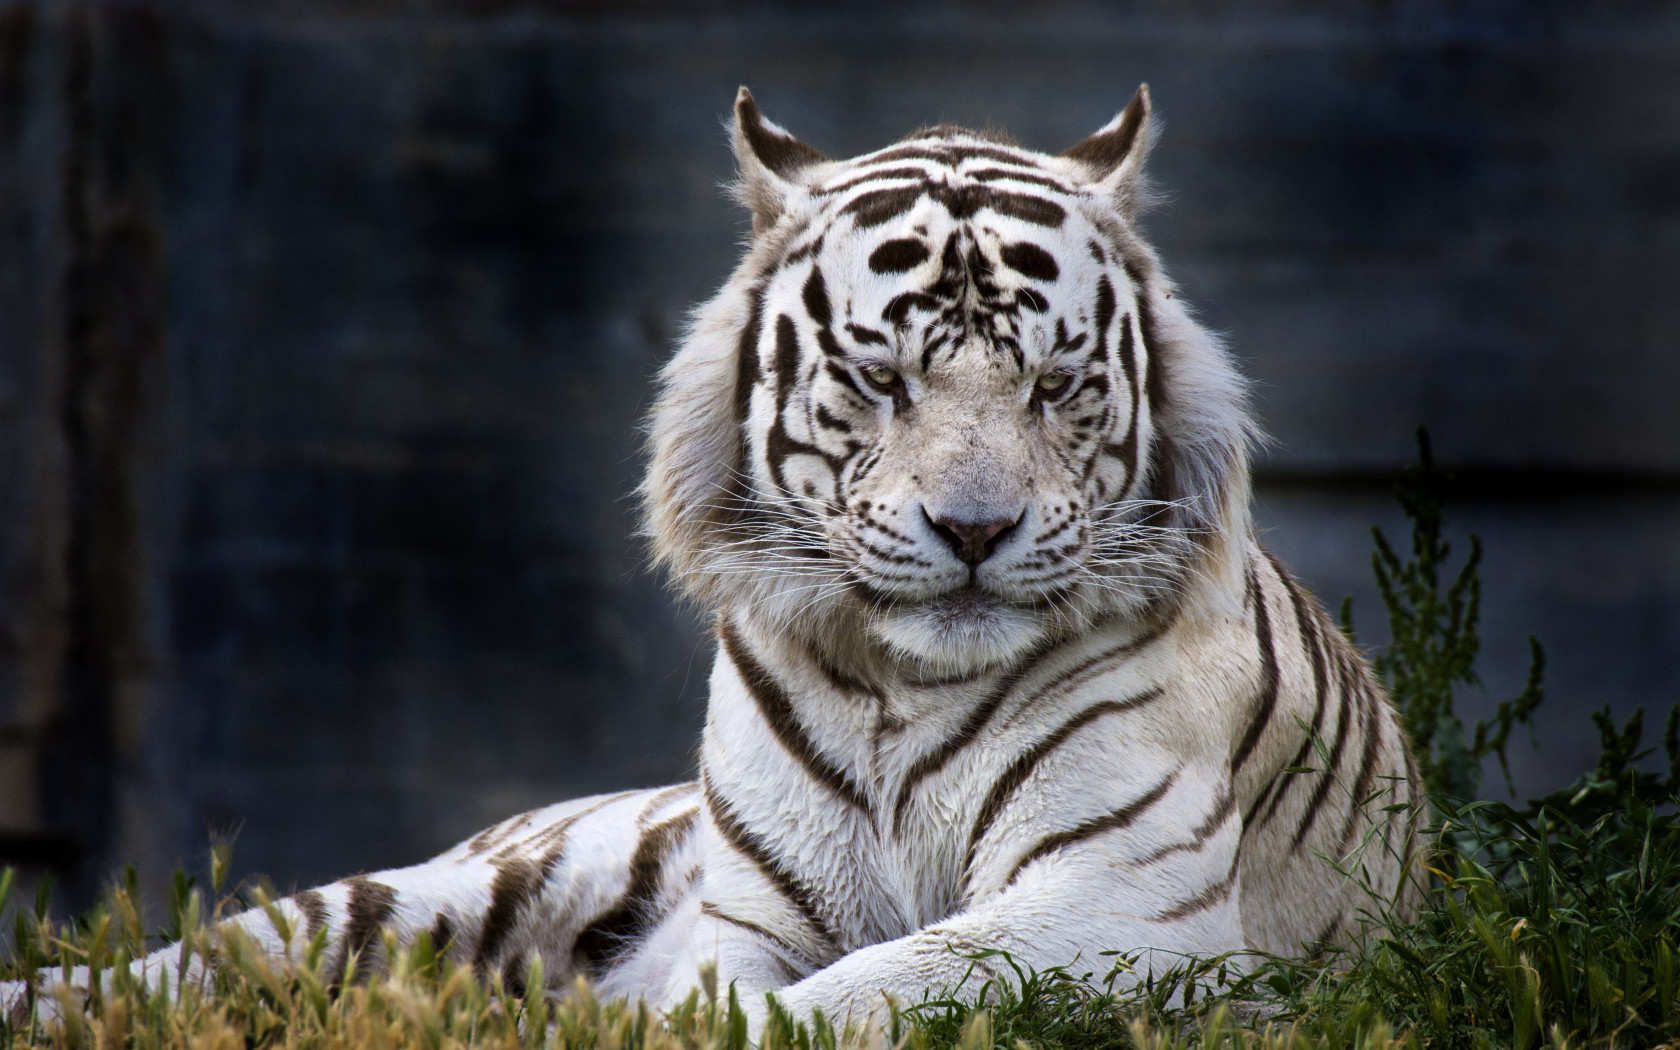 The white tiger from Madrid Zoo wallpaper 1680x1050